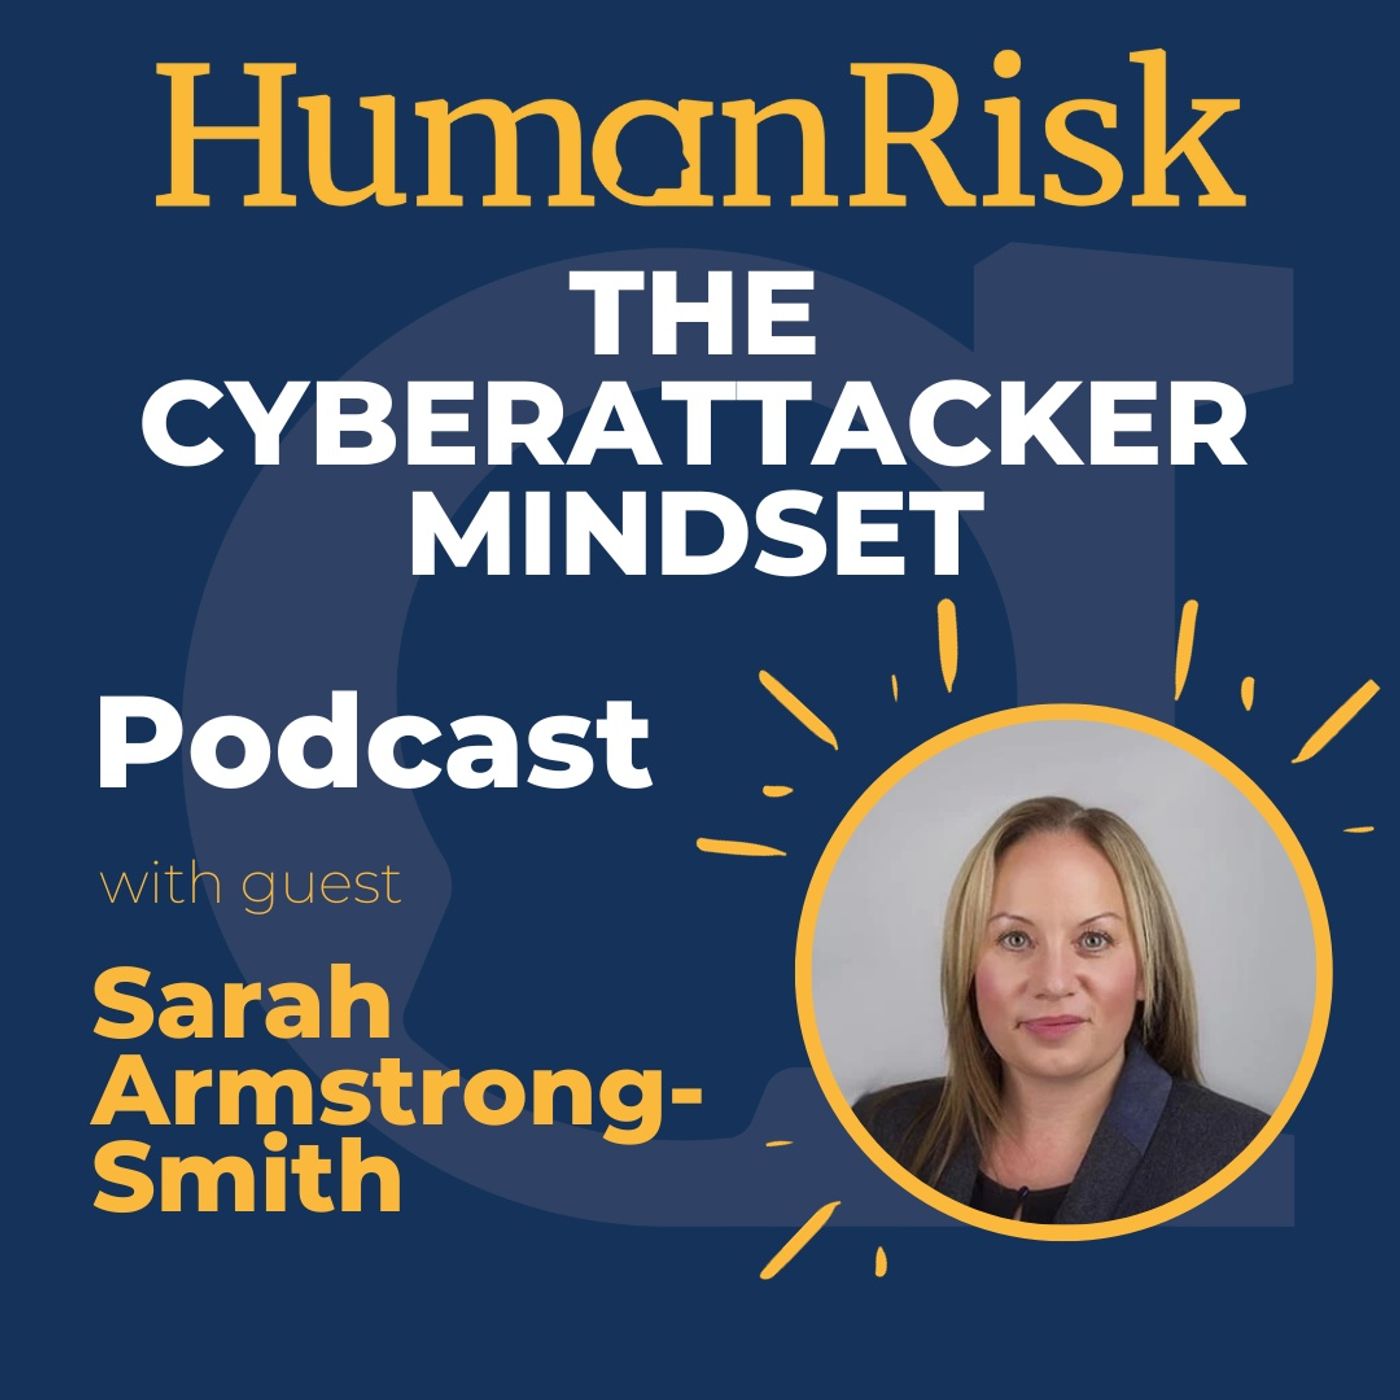 Sarah Armstrong-Smith on The Cyber Attacker Mindset